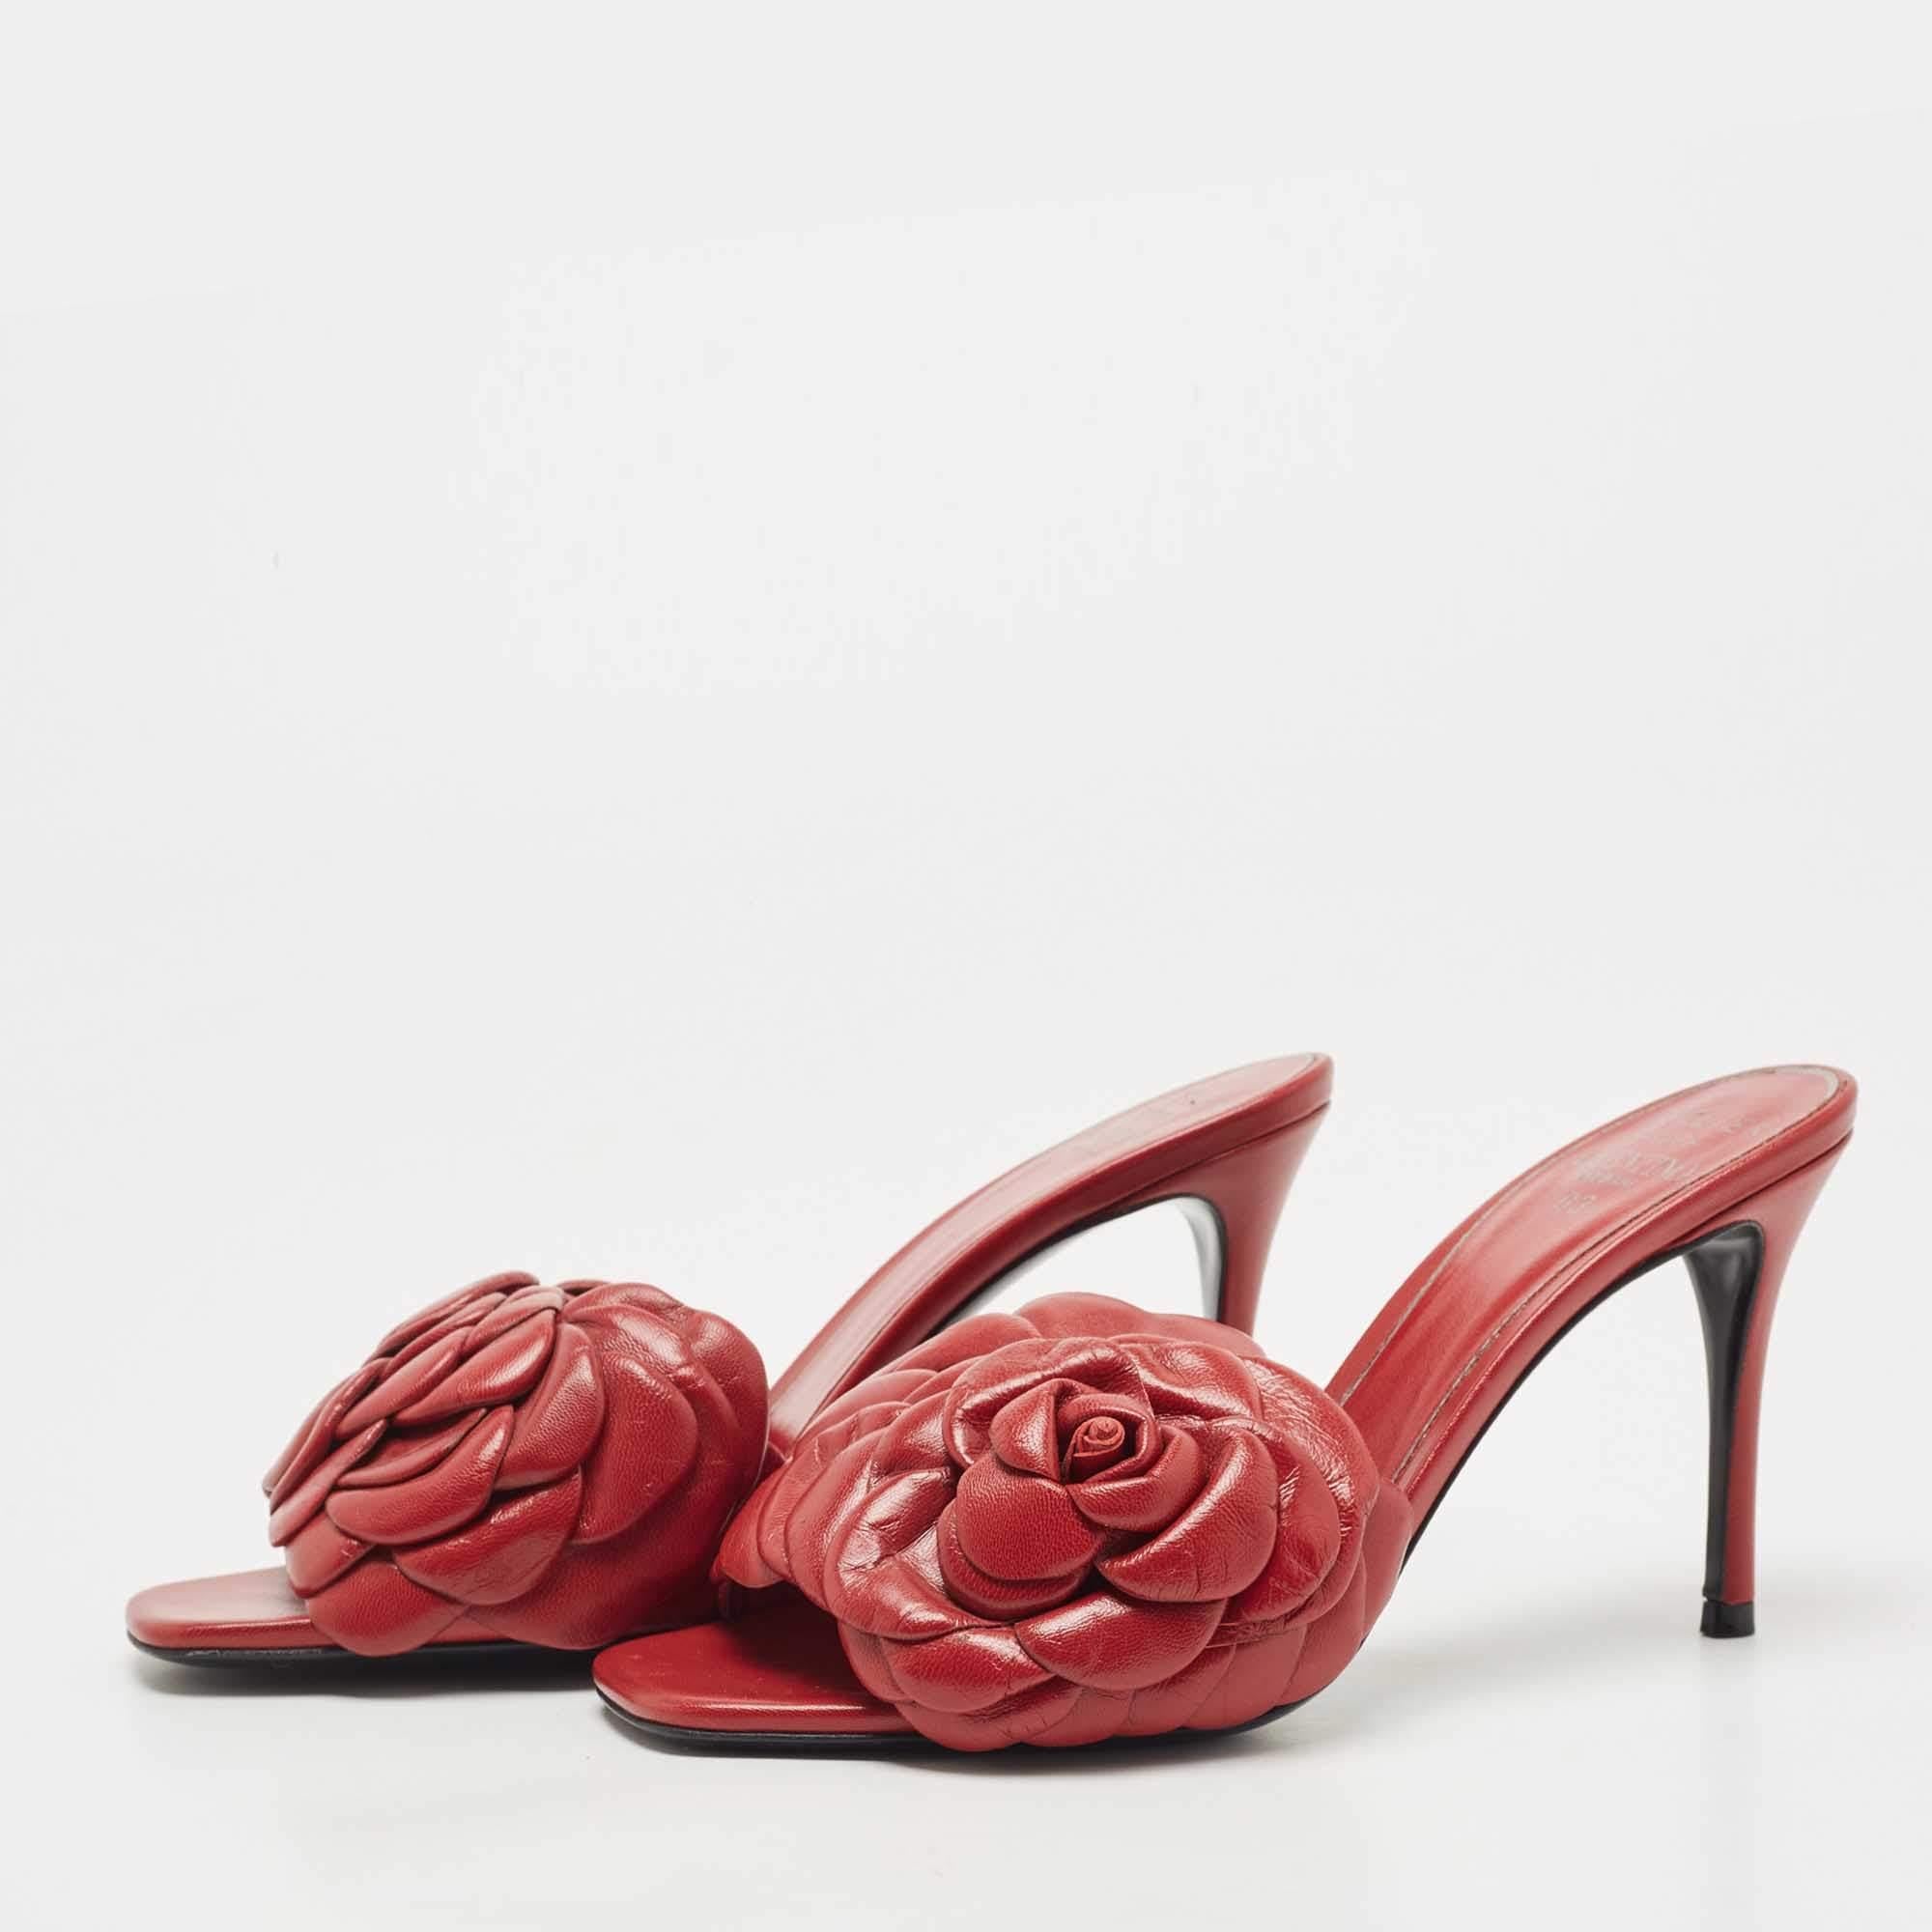 Infused with romantic aesthetics, these Valentino sandals are captivating in a red shade. They are made from leather and are appealing with rose atelier motif on the upper and are balanced upon 9cm heels.

Includes: Original Dustbag, Original Box,